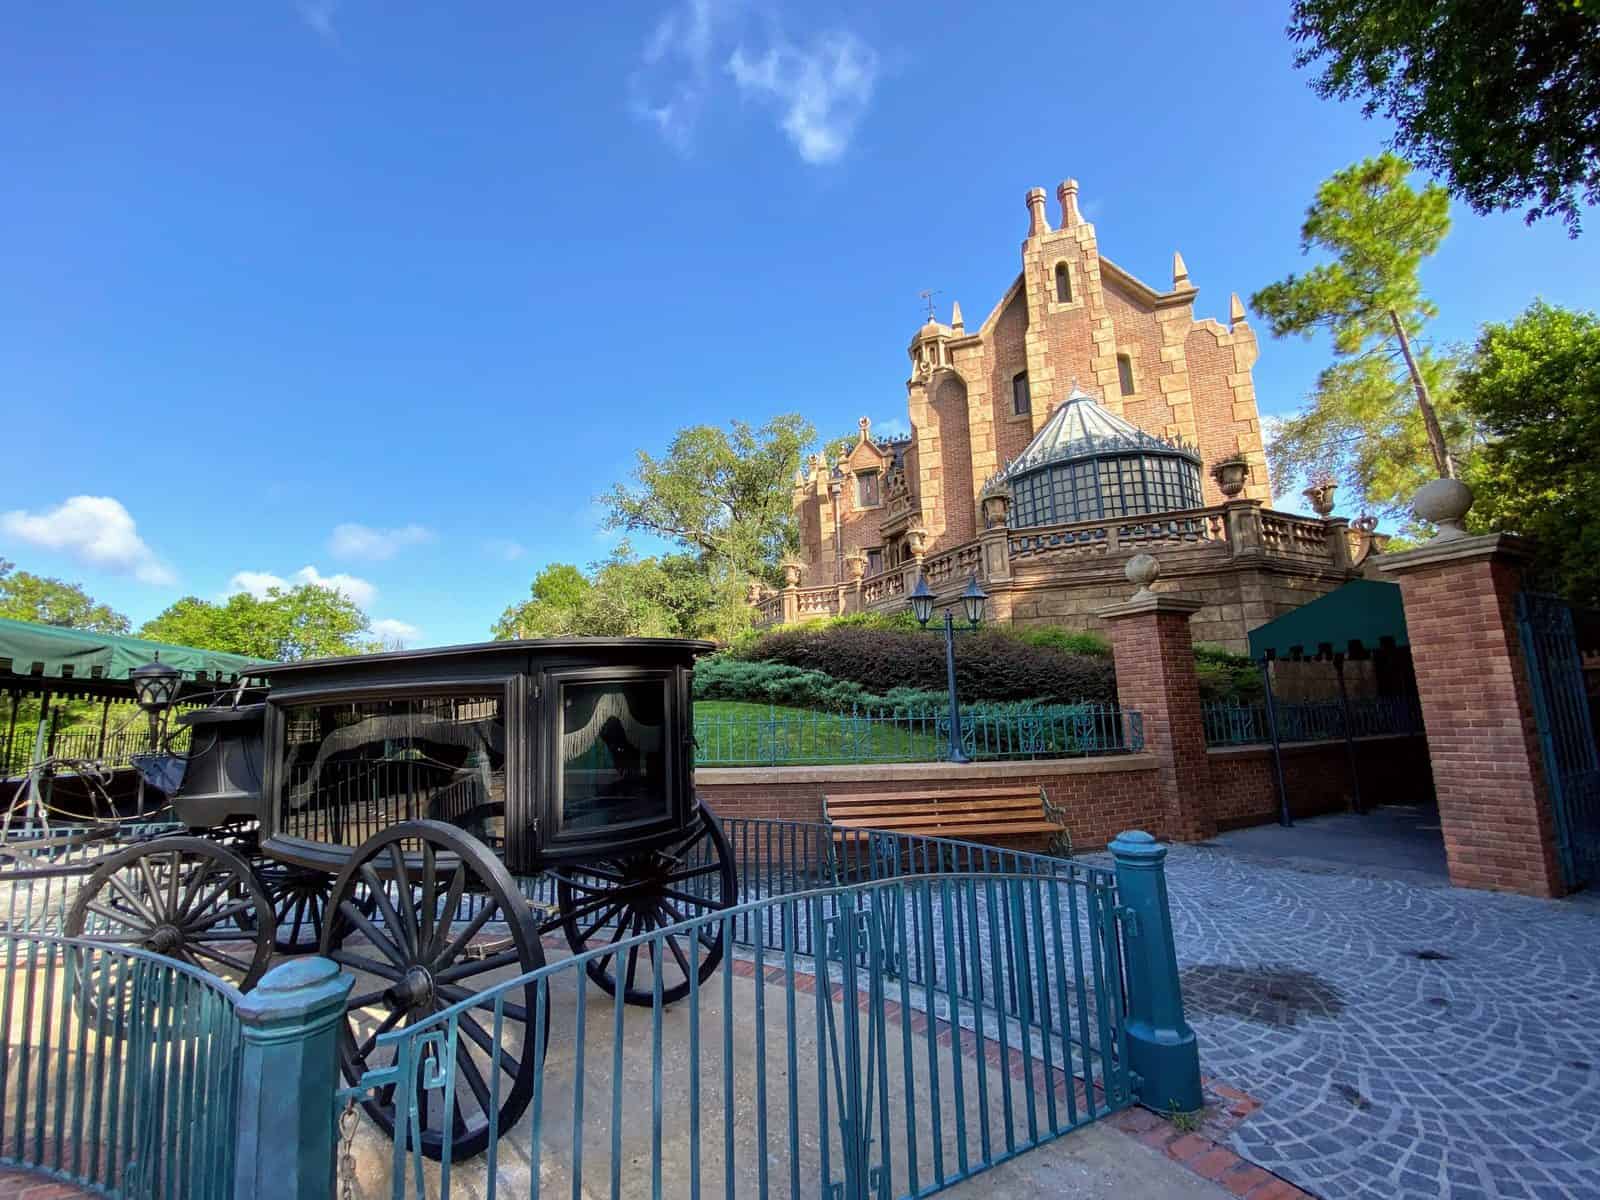 The Best of the Best: Top 11 Rides at Magic Kingdom